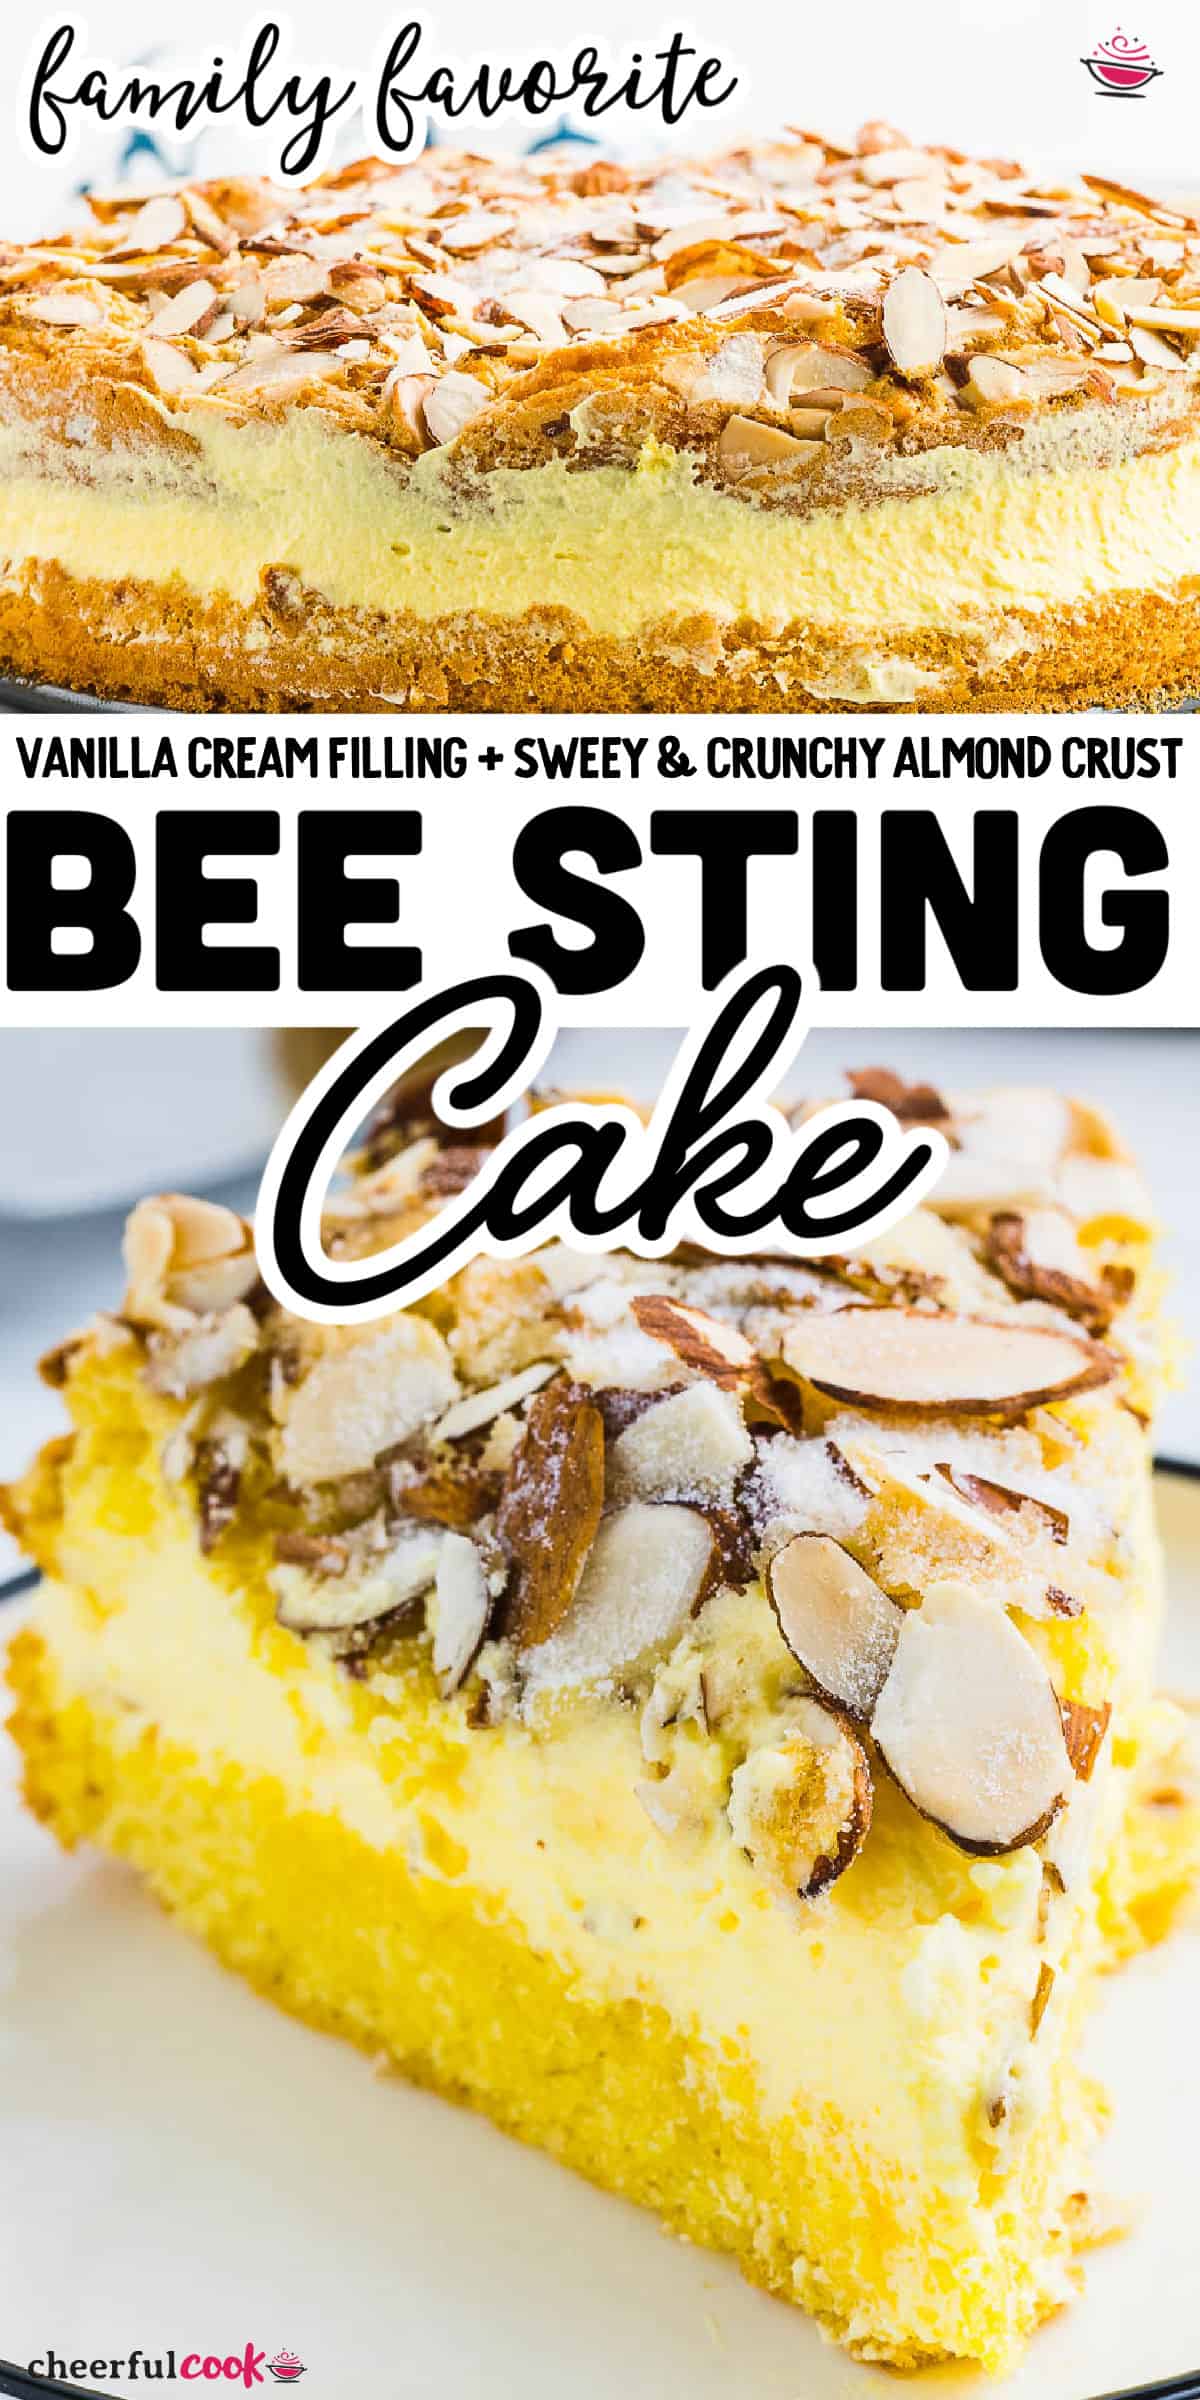 Bienenstich or Bee Sting Cake is a super light and airy German cake recipe with a delicious vanilla cream filling and topped with sugary, crunchy almonds. And with 7 ingredients and less than 20 minutes of prep time, anyone can make this bakery-level cake recipe. Impressing your friends and family has never been easier. #cheerfulcook #german #recipe #easy #cake #beestingcake #bienenstich ♡ cheerfulcook.com via @cheerfulcook